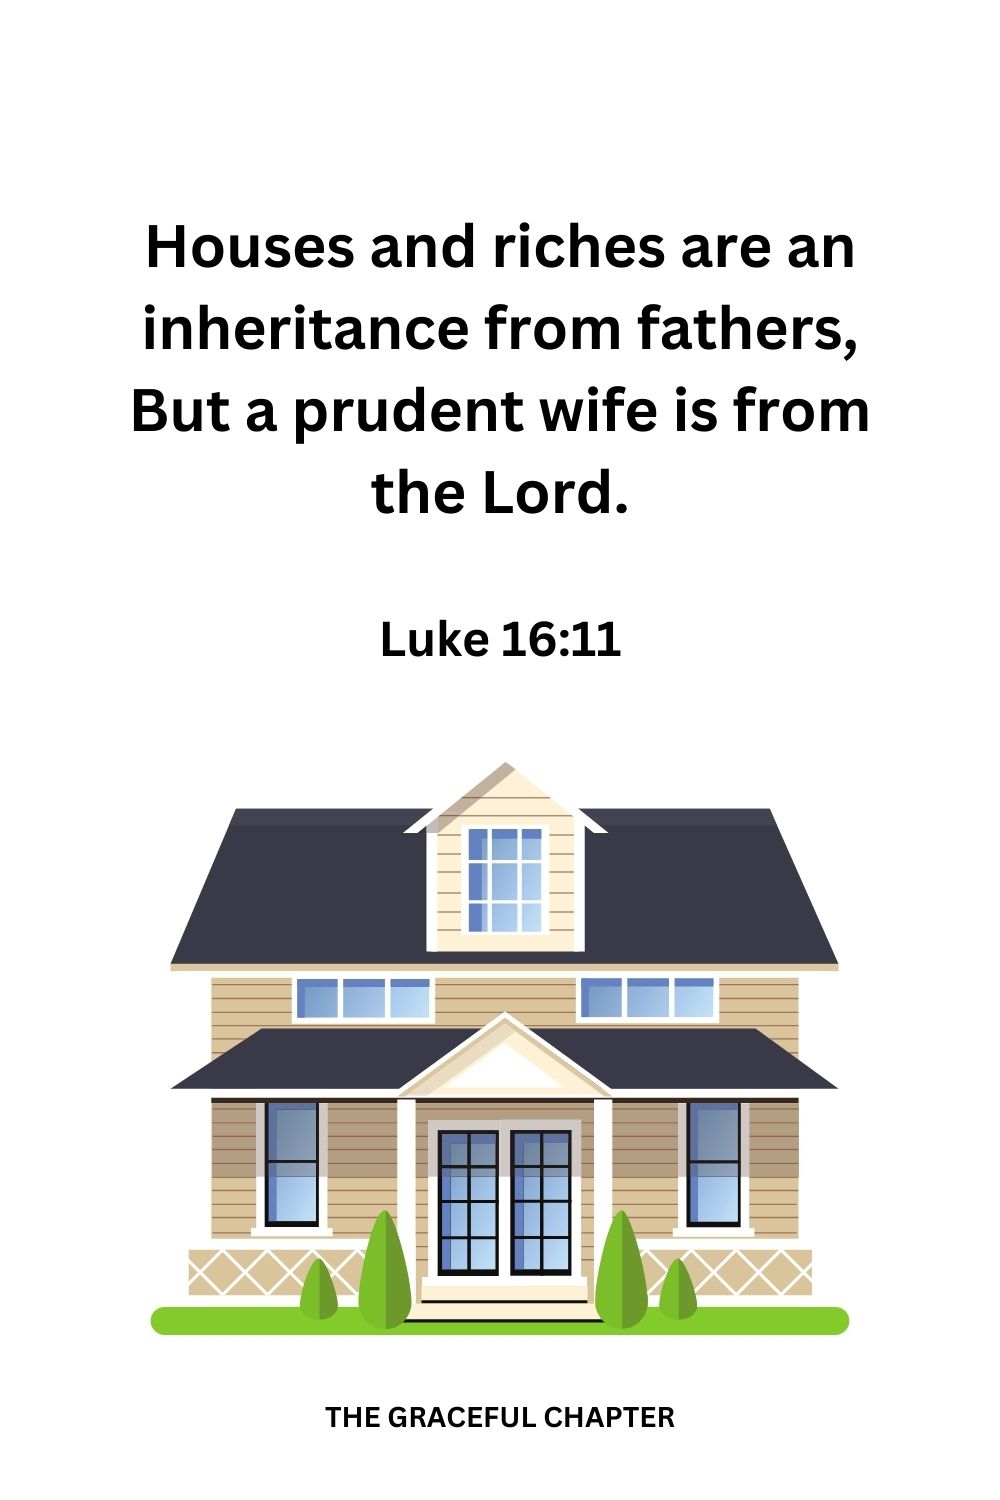 Houses and riches are an inheritance from fathers, But a prudent wife is from the Lord.
Proverbs 19:14